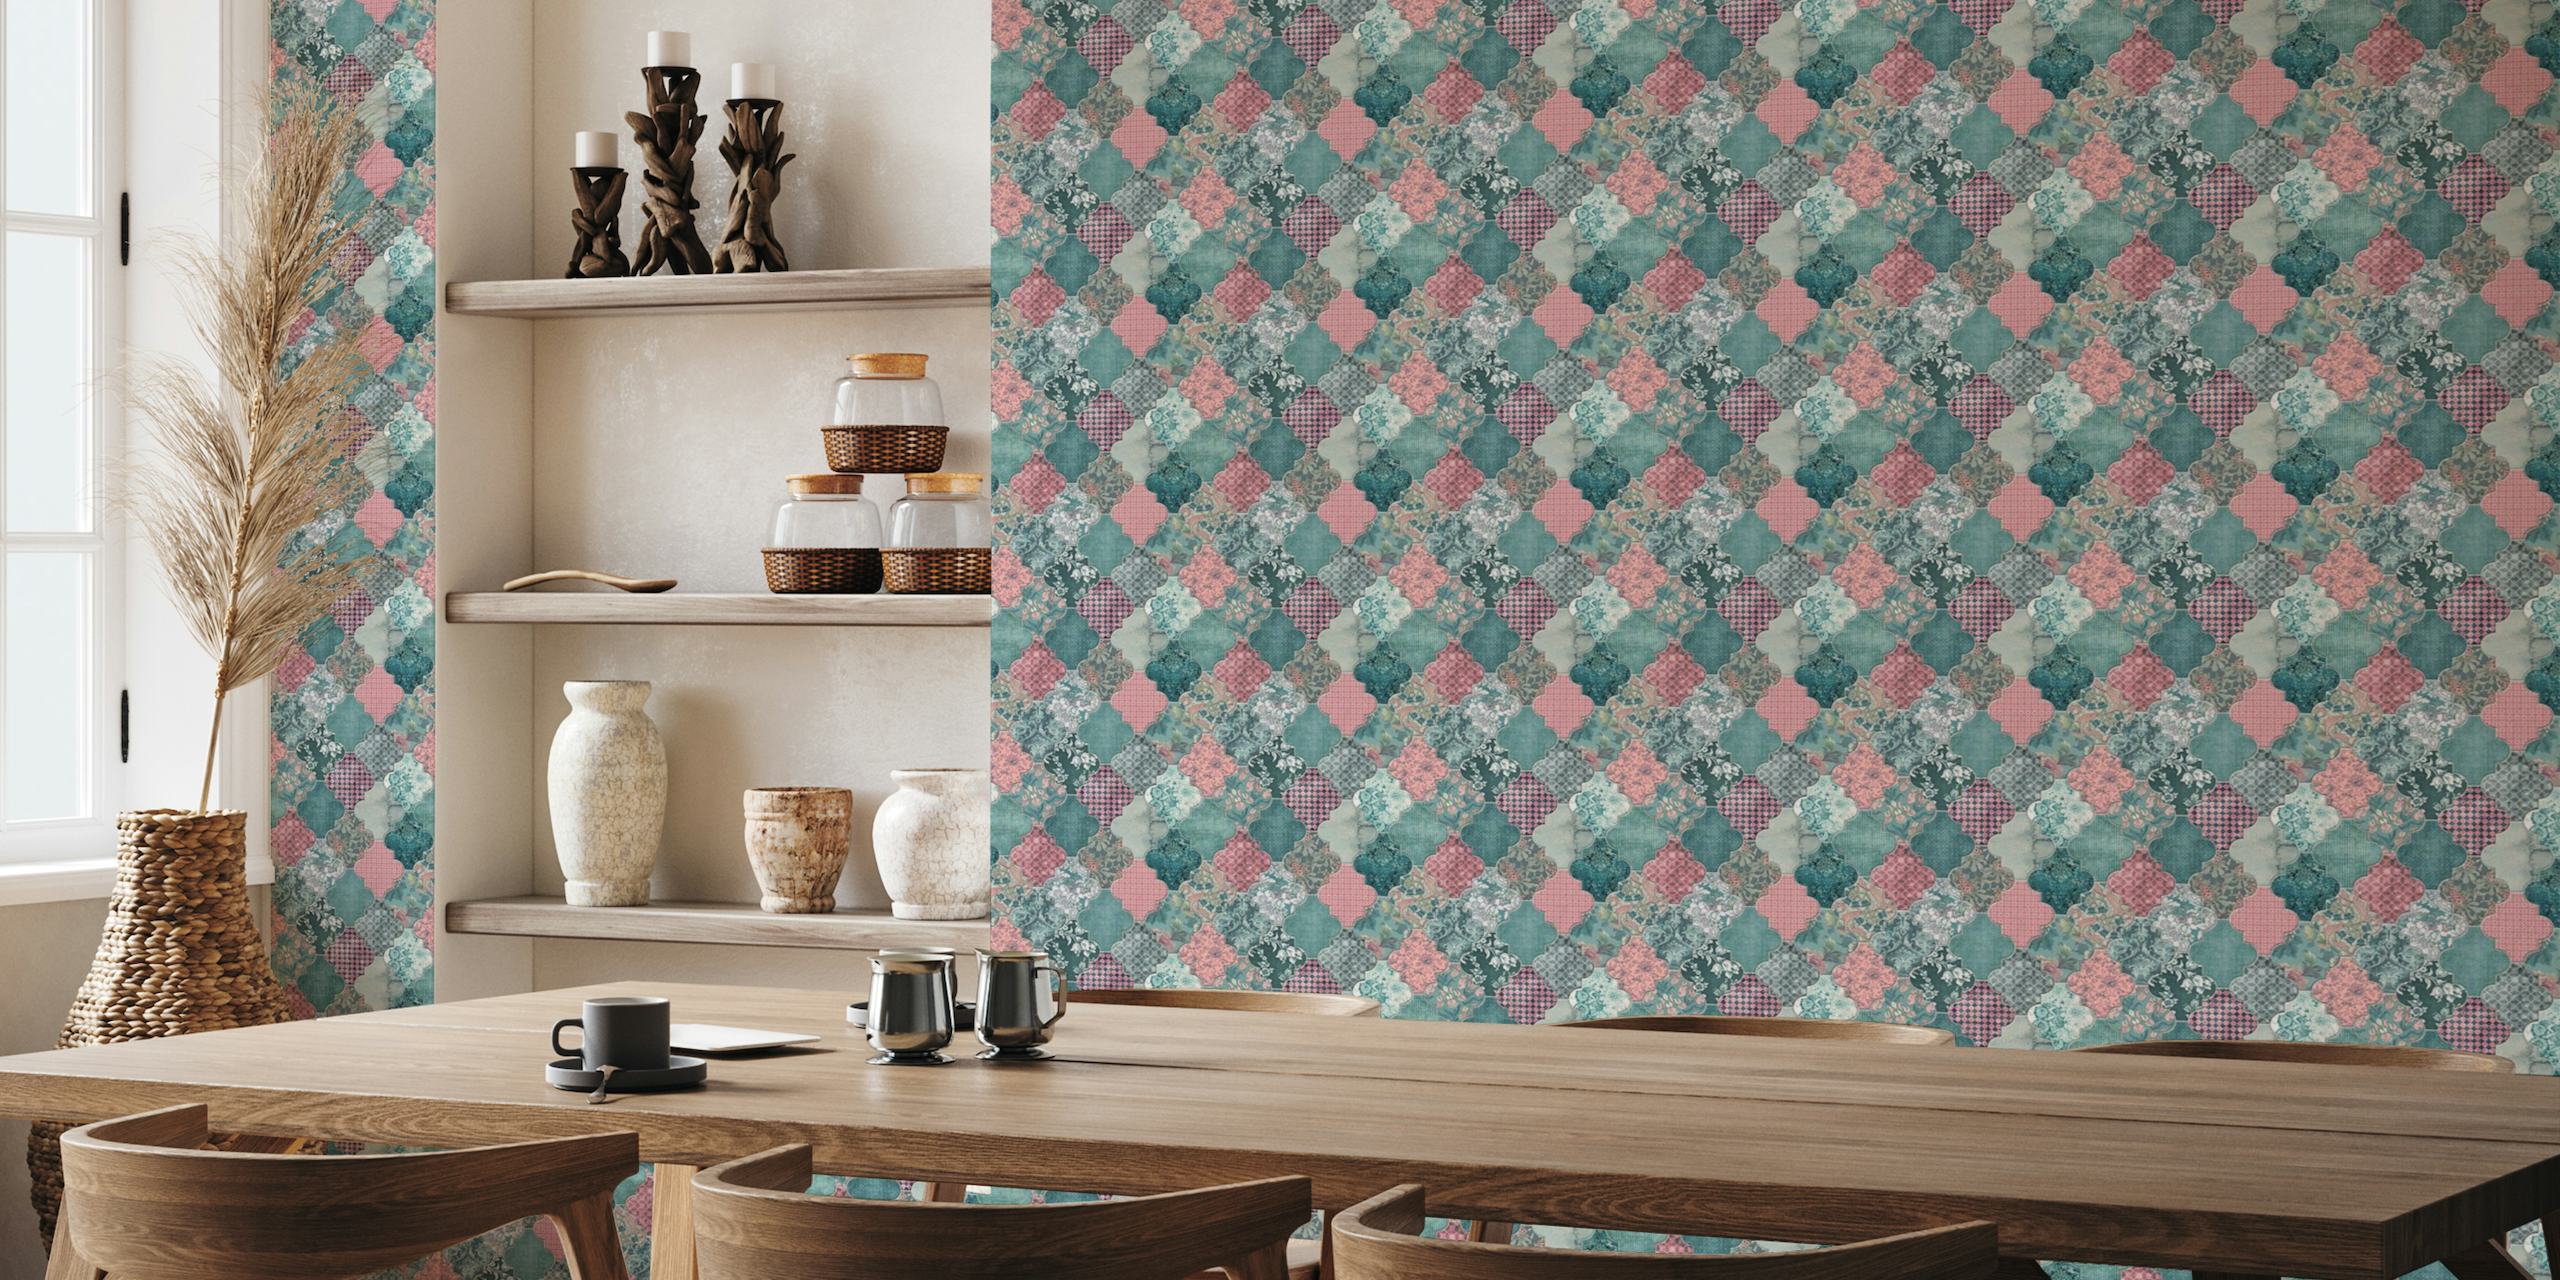 Moroccan Tiles Teal Pink Small wall mural with intricate designs and a mix of teal, pink, and grey colors